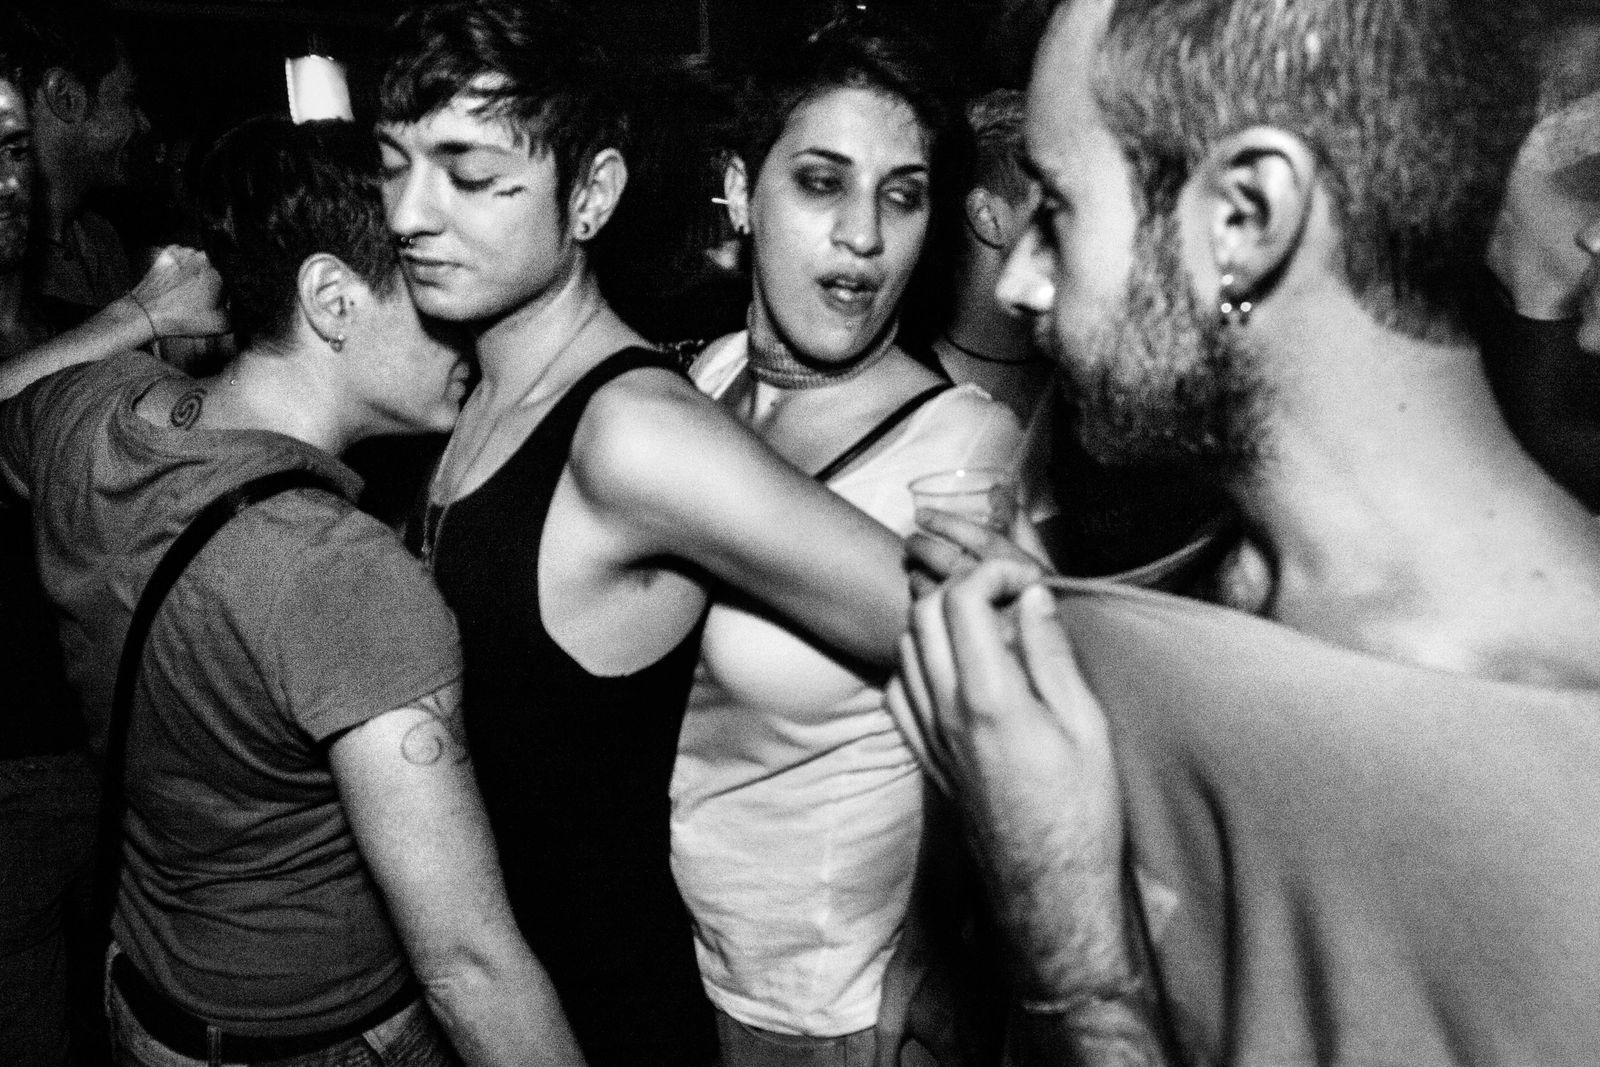 © Gianluca Abblasio - 2011 Rome - Italy. Dancing in a LGBT party.